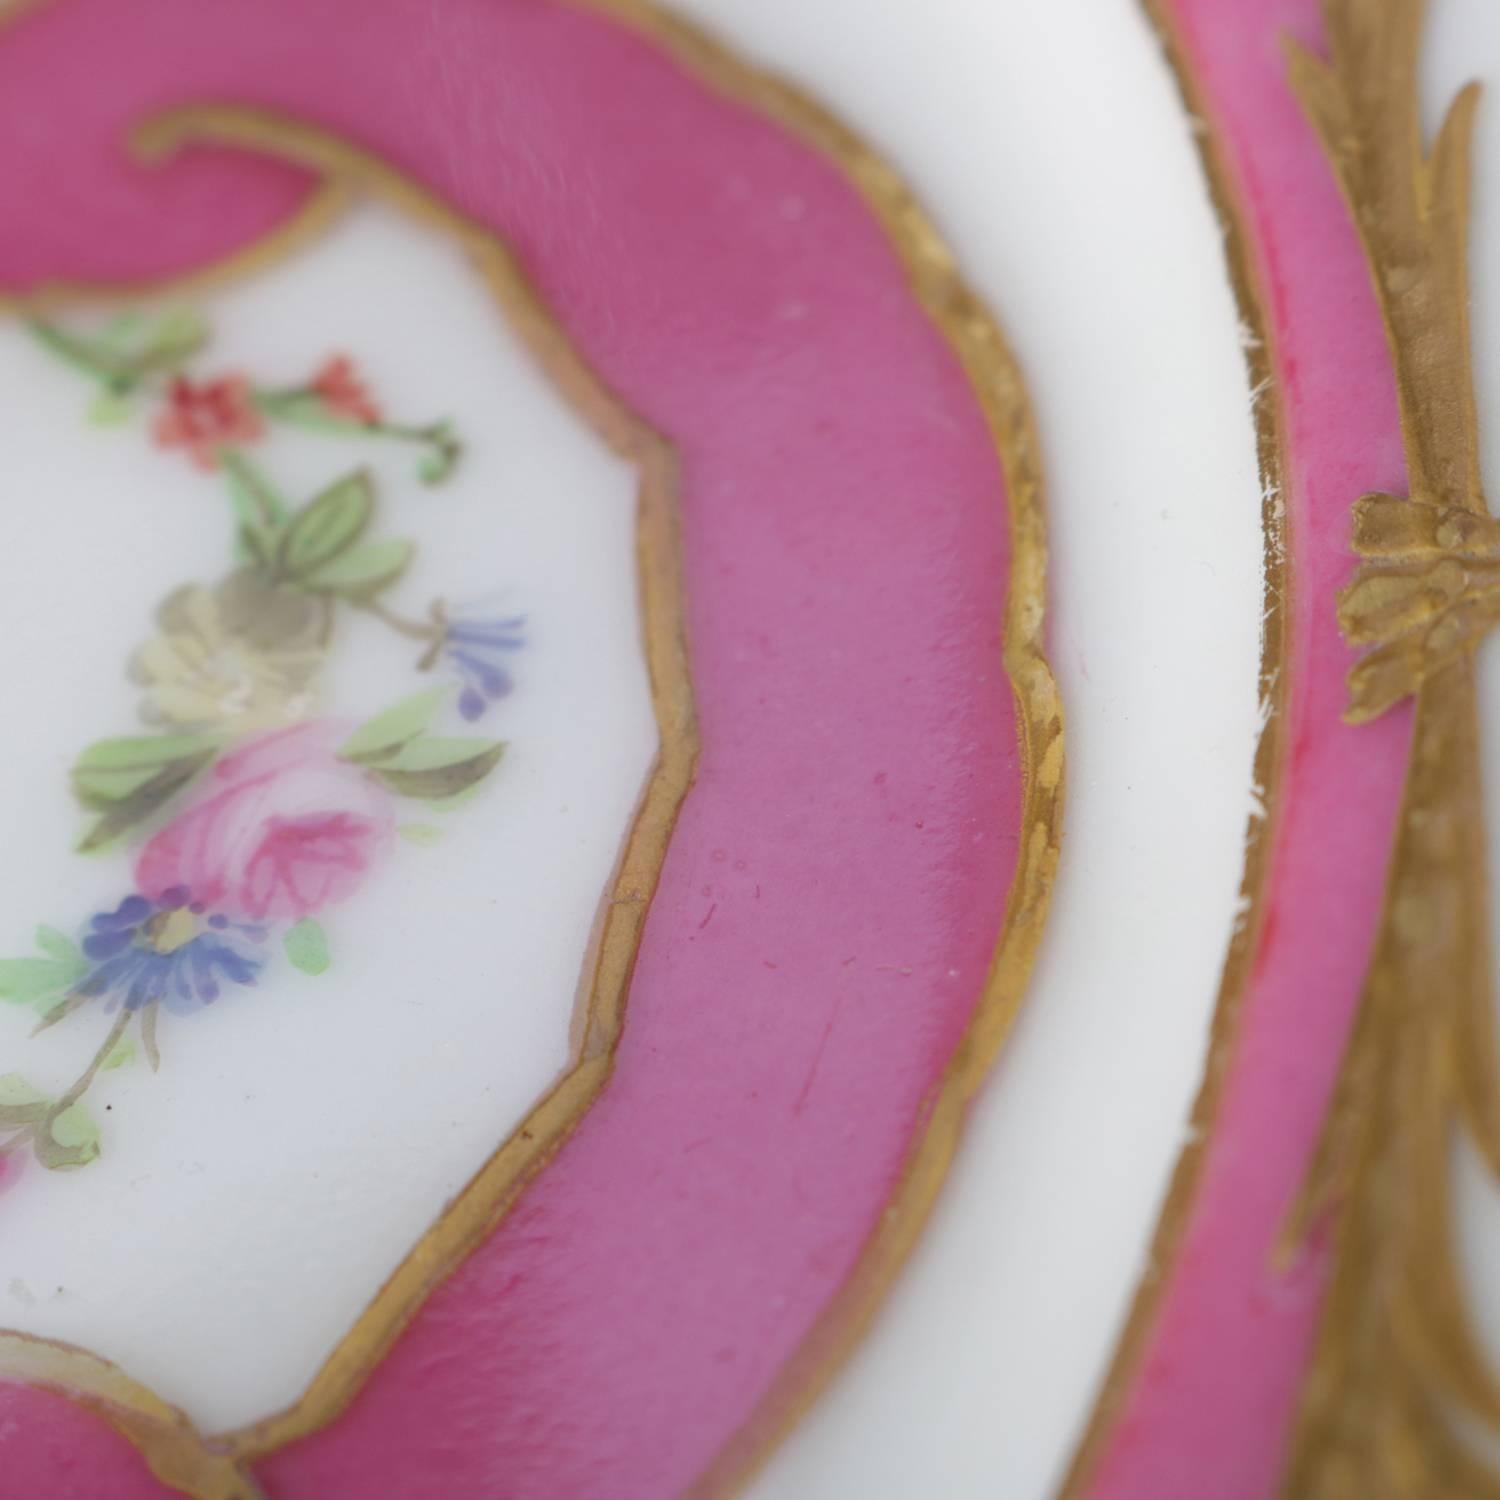 20th Century Antique French Sevres Hand-Painted and Gilt Porcelain Signed Portrait Plate